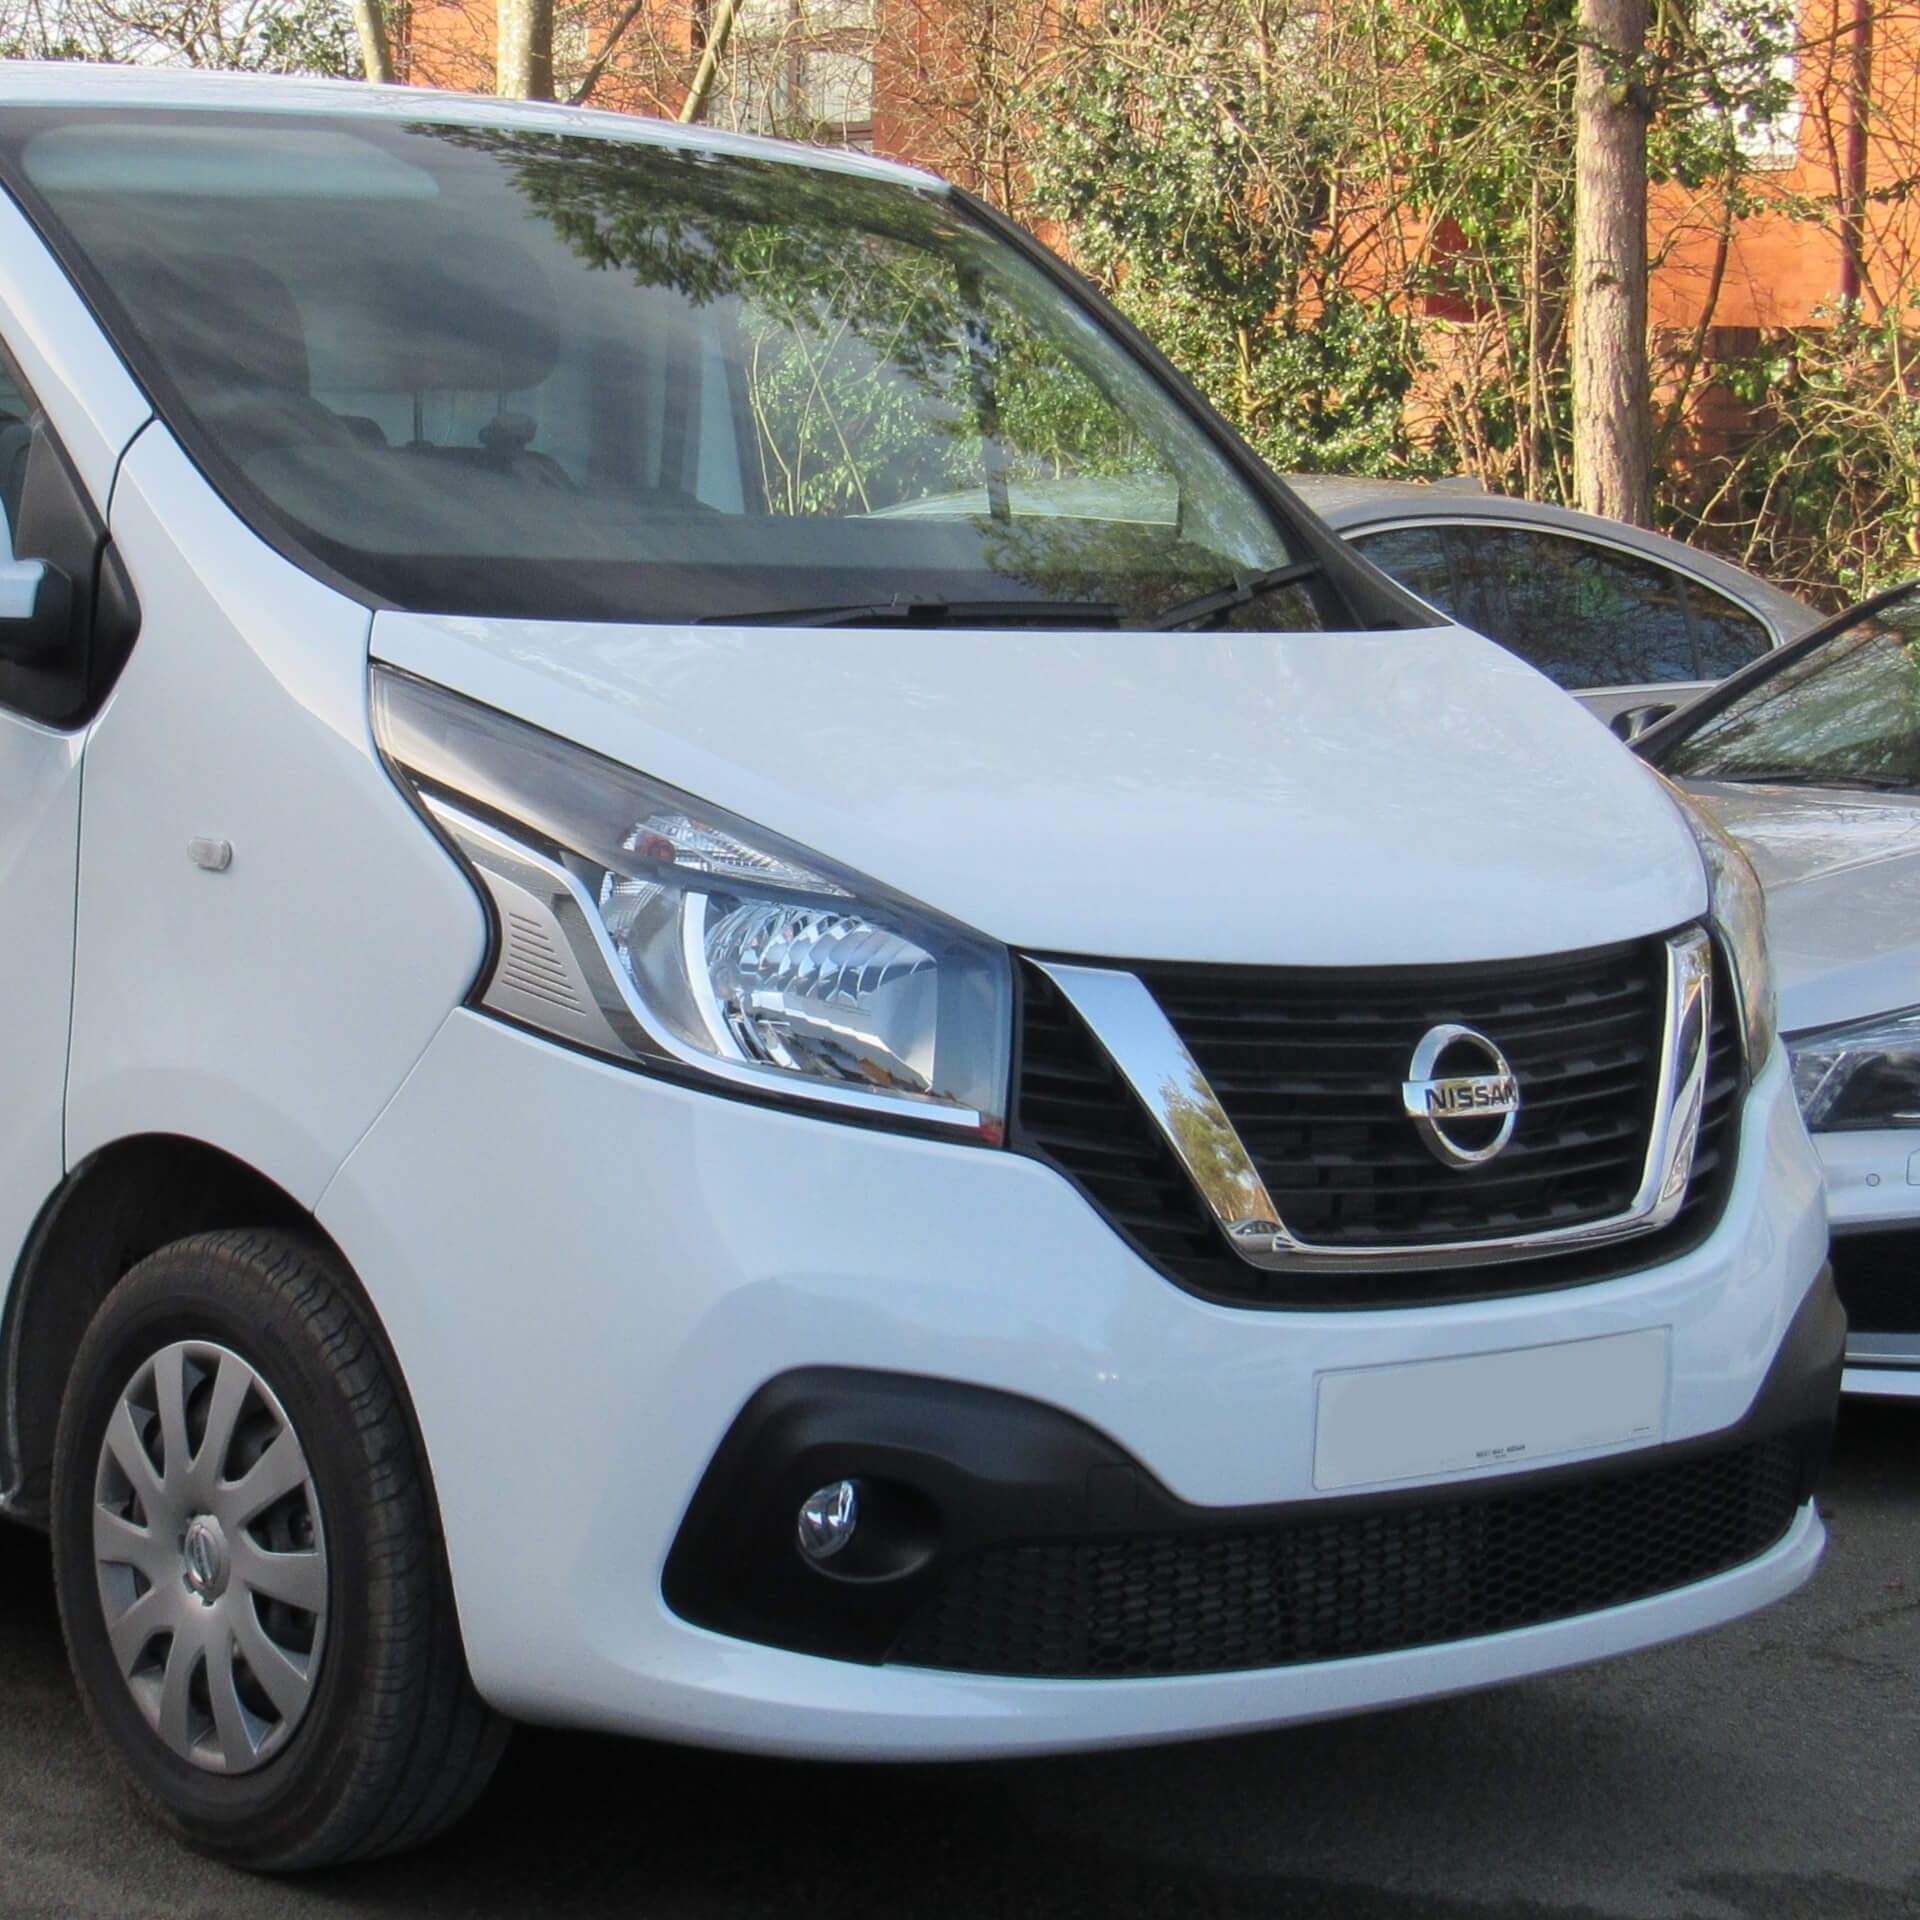 Direct4x4 accessories for Nissan NV300 vehicles with a photo of the front of a white Nissan NV300 parked in a car park